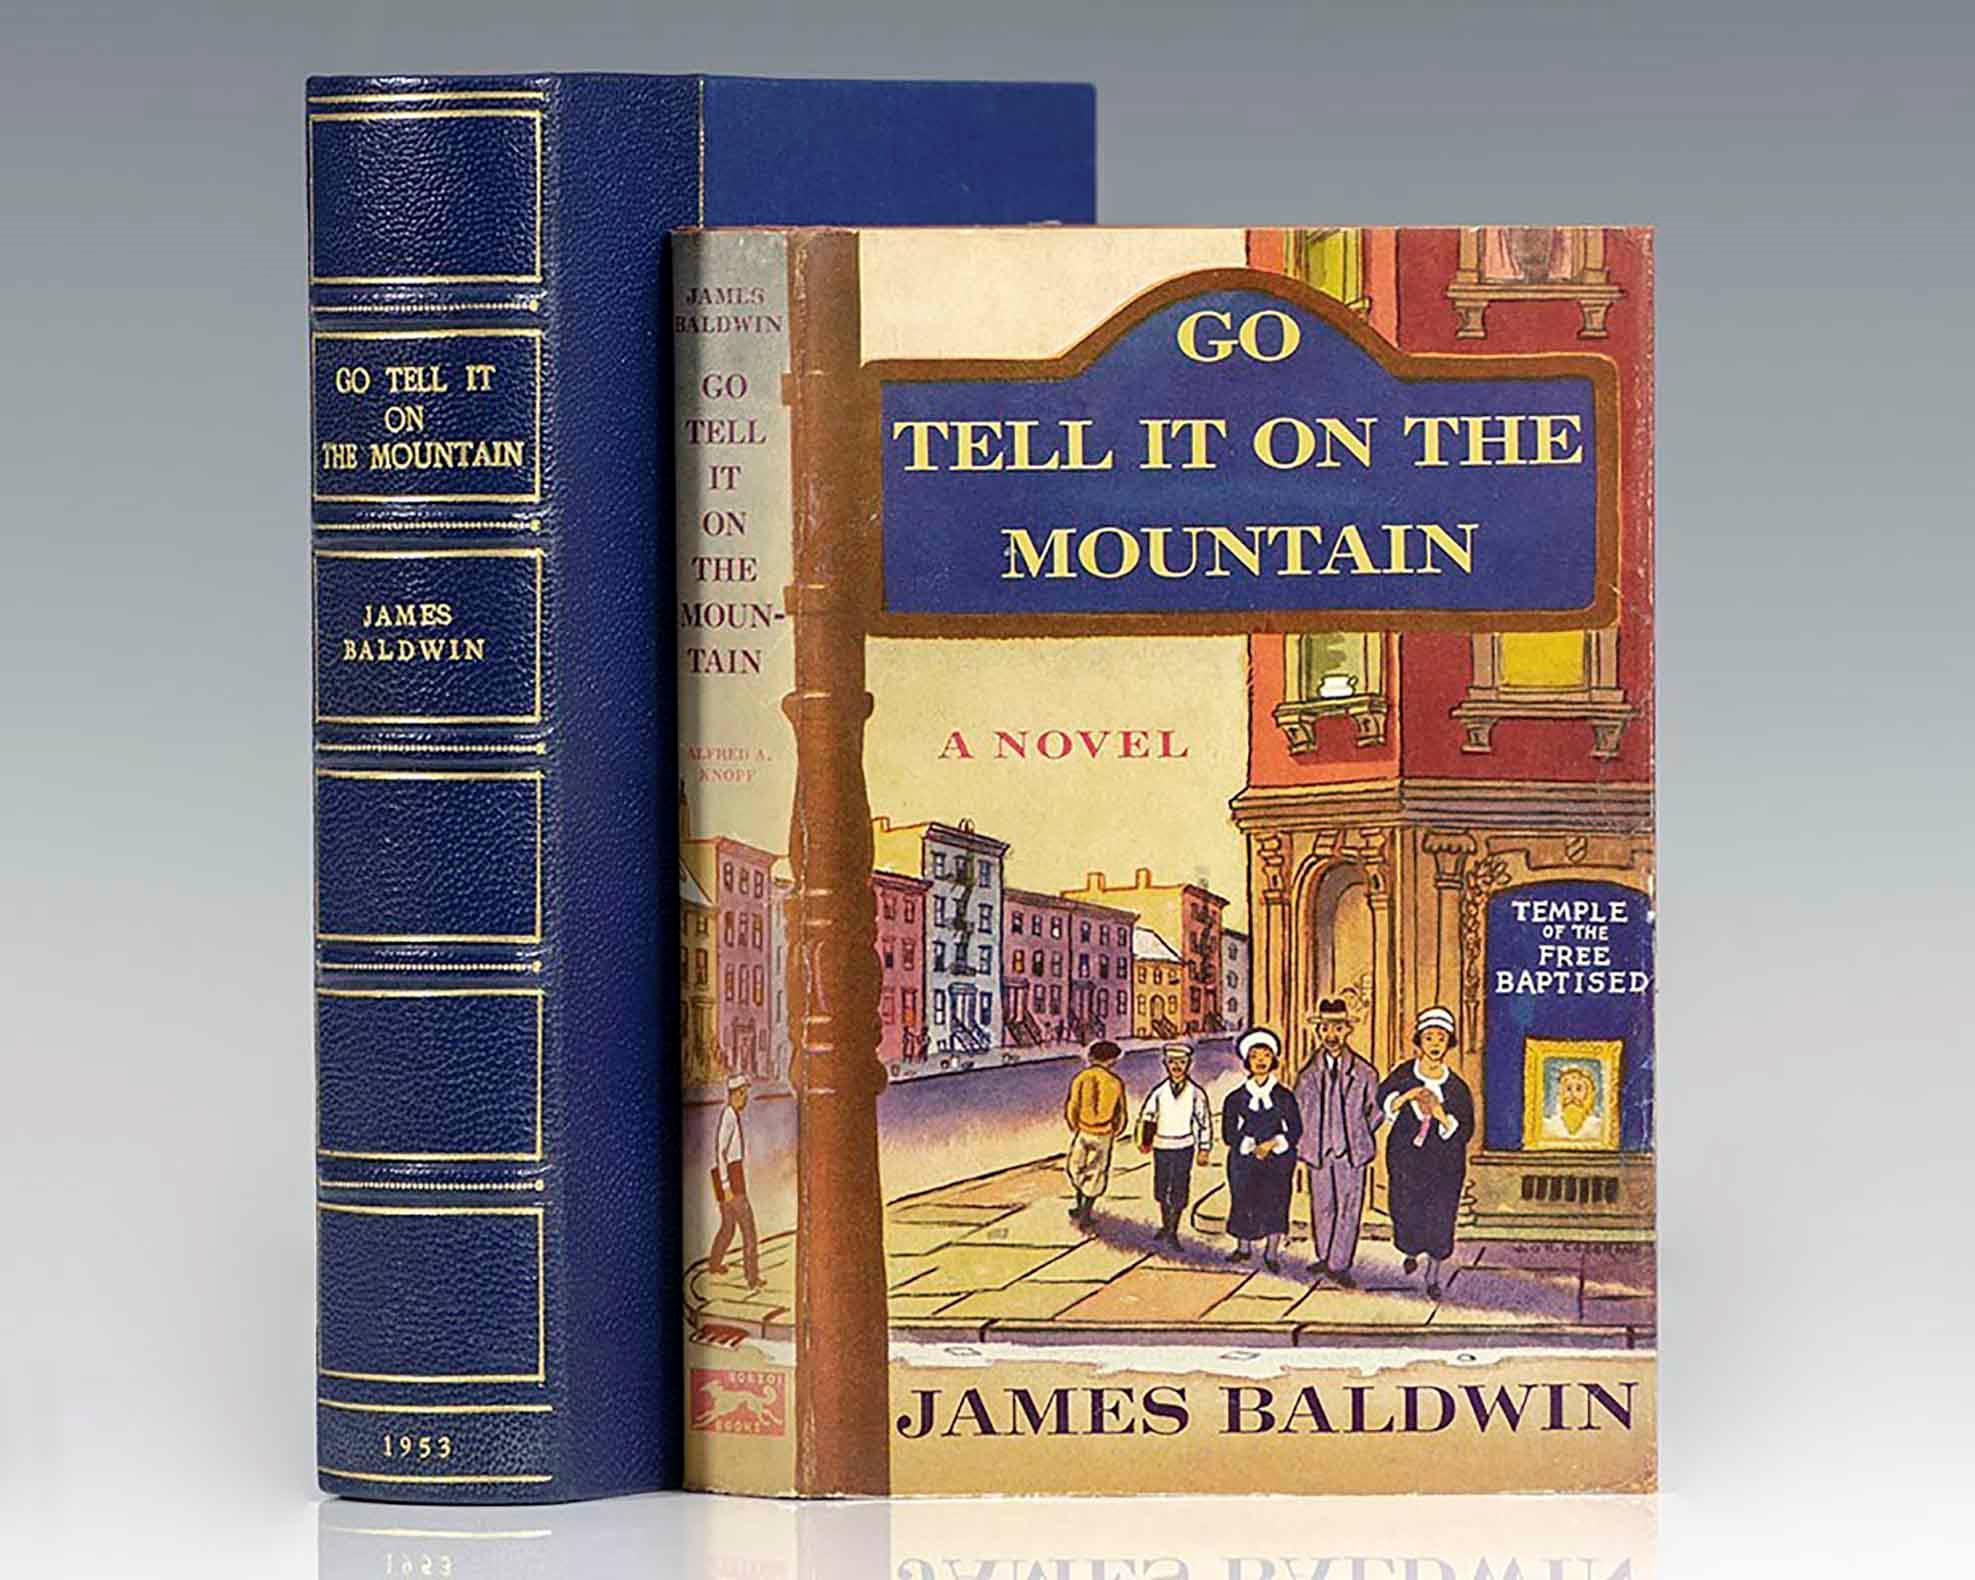 16-enigmatic-facts-about-go-tell-it-on-the-mountain-james-baldwin